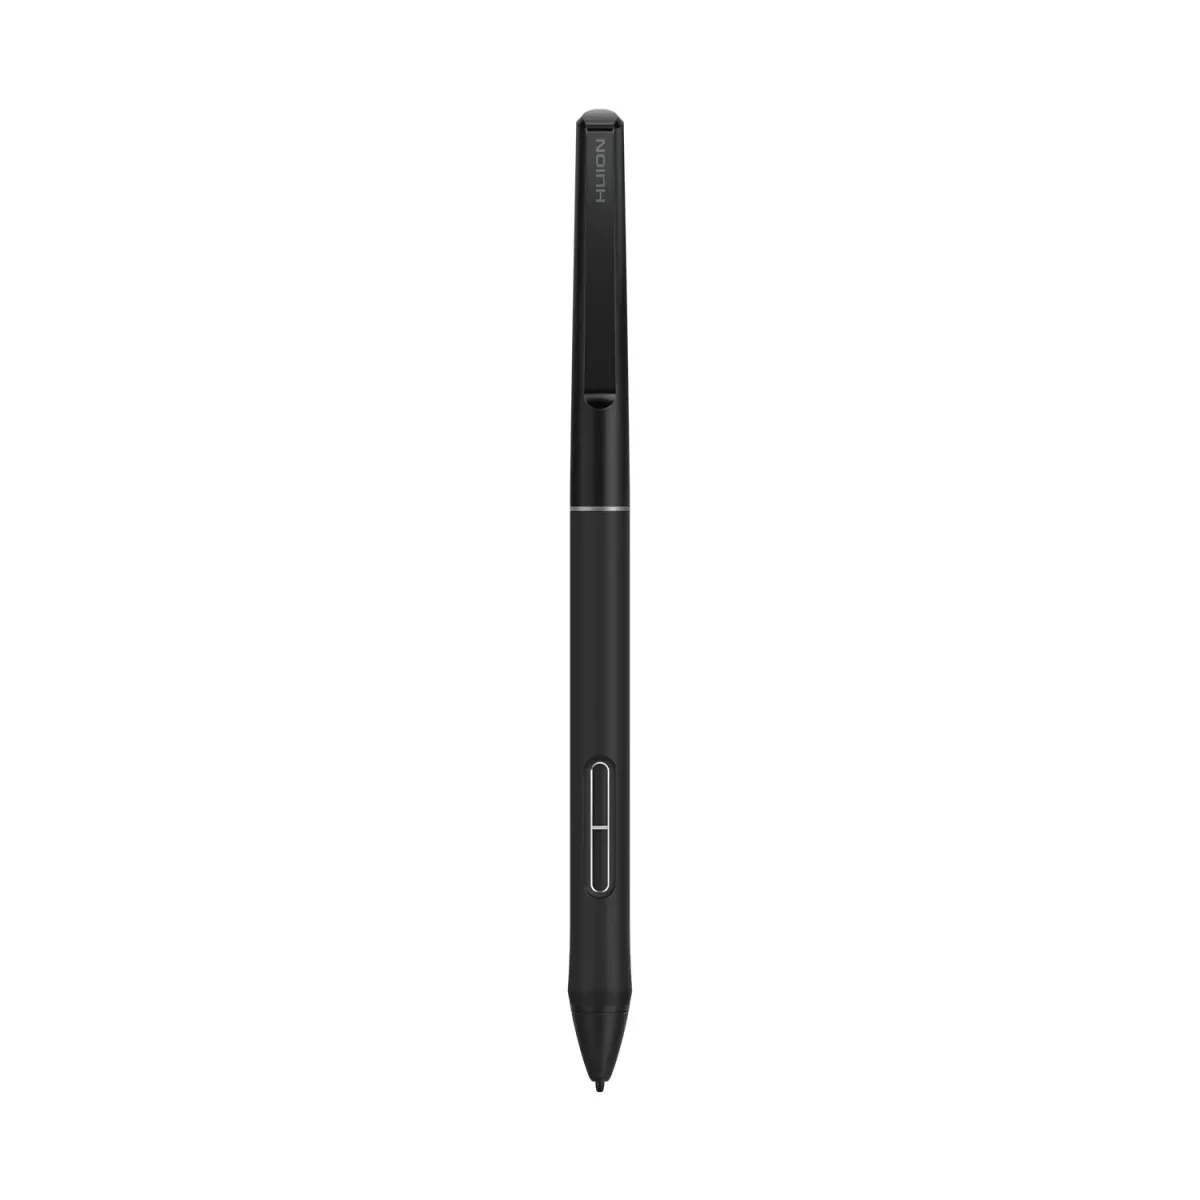 Huion液タブ用バッテリー不要ペンPW550S | Huion Official Store 